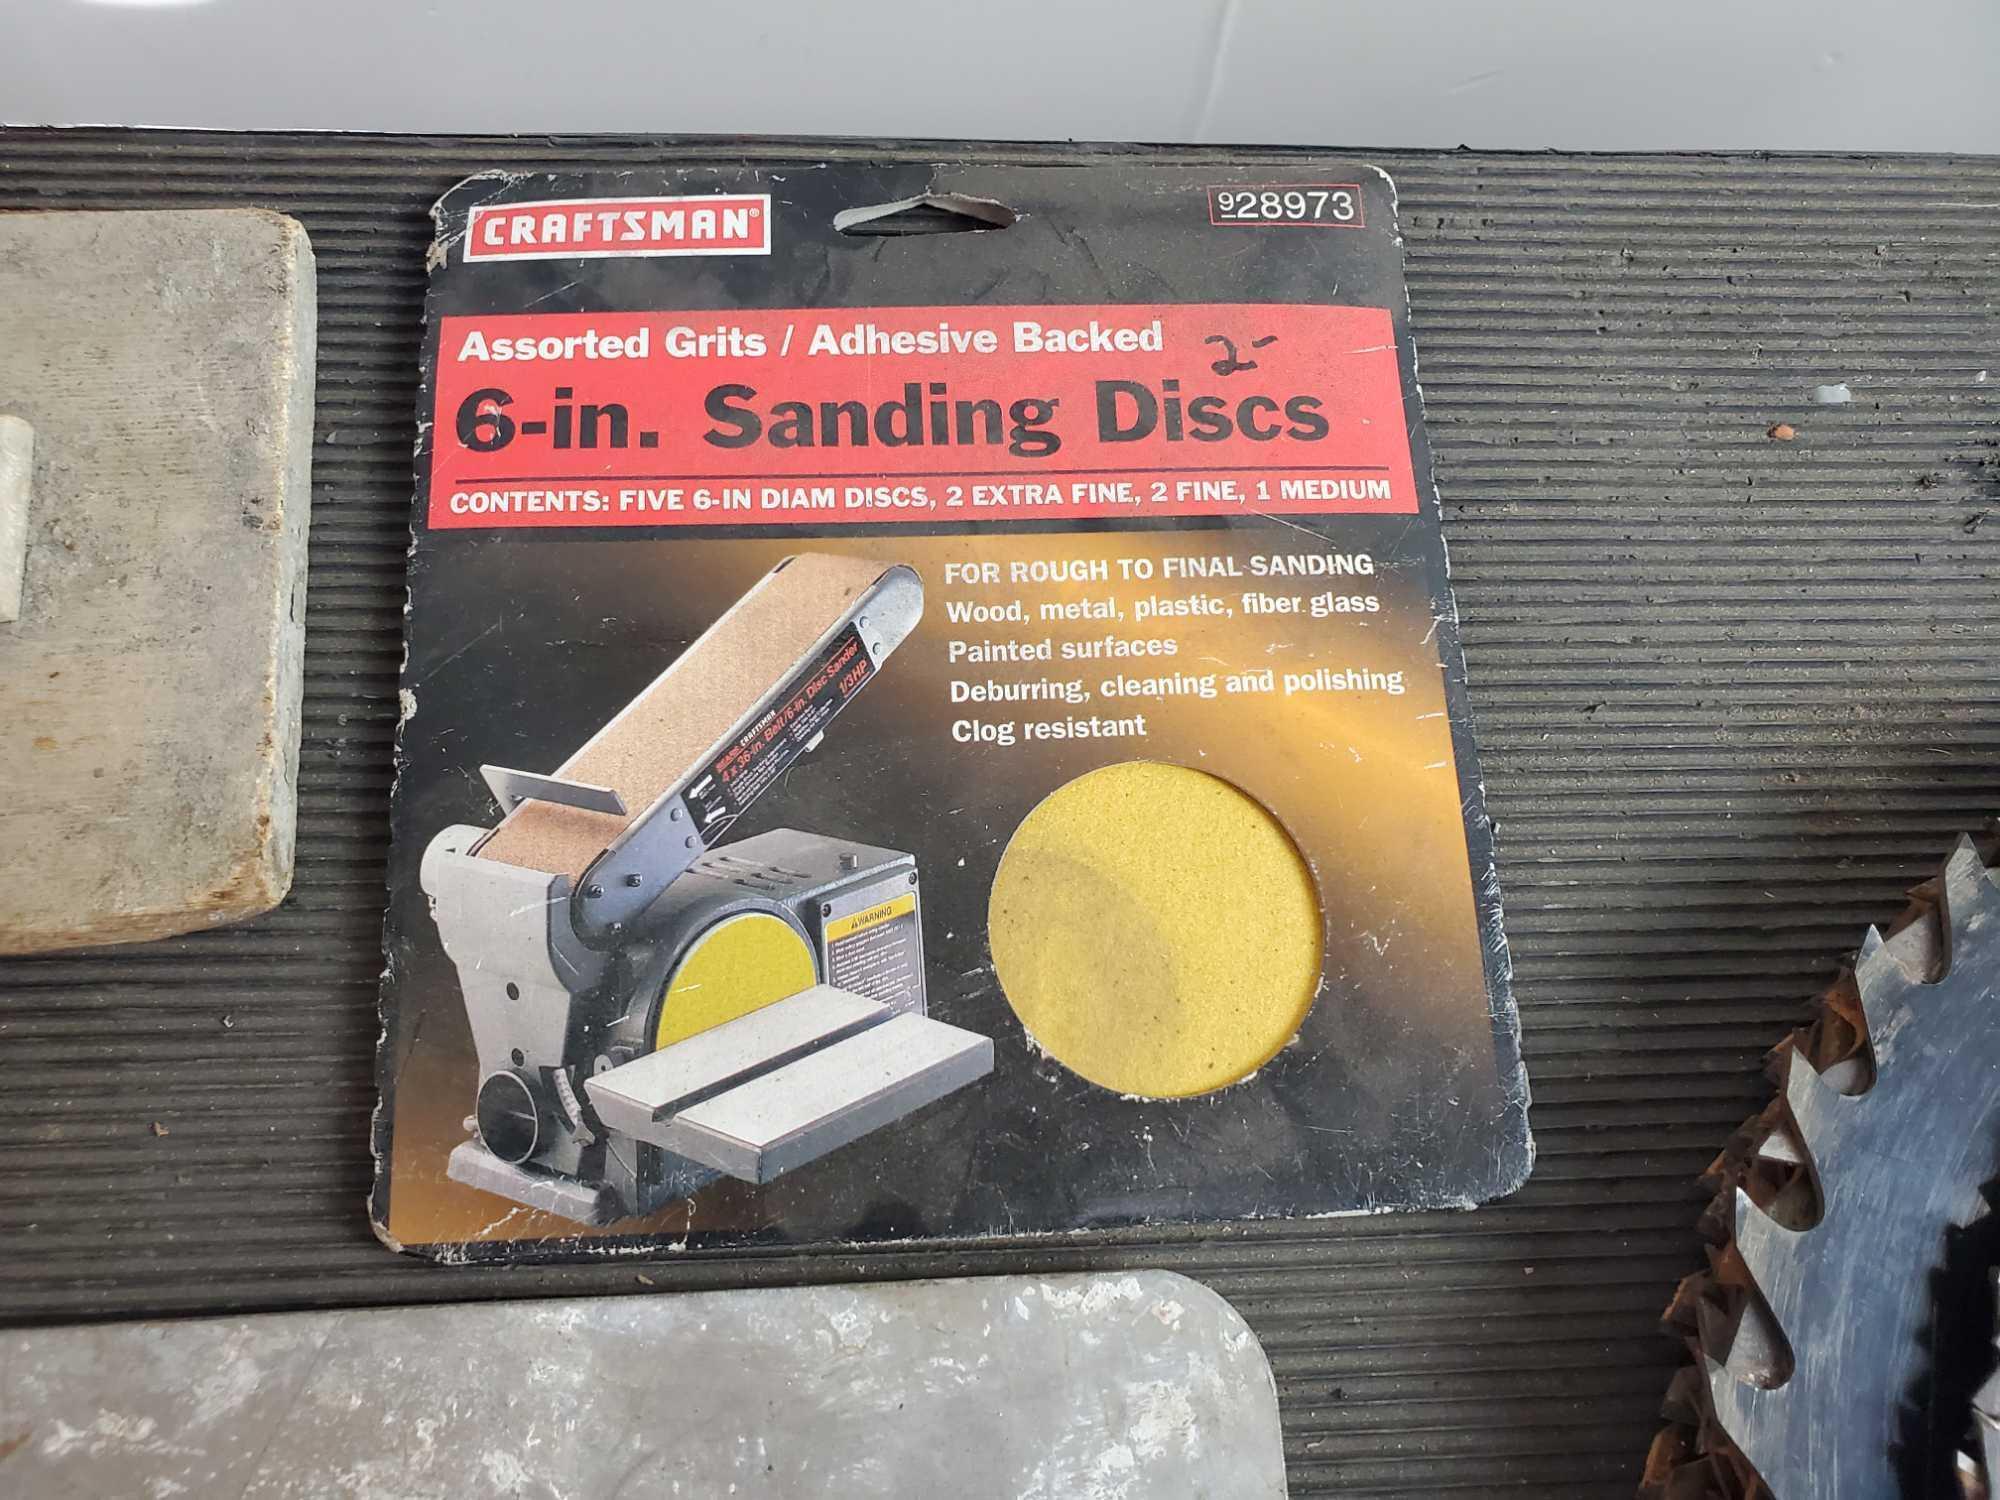 Concrete tools. New and used saw blades. 6 in. sanding discs.